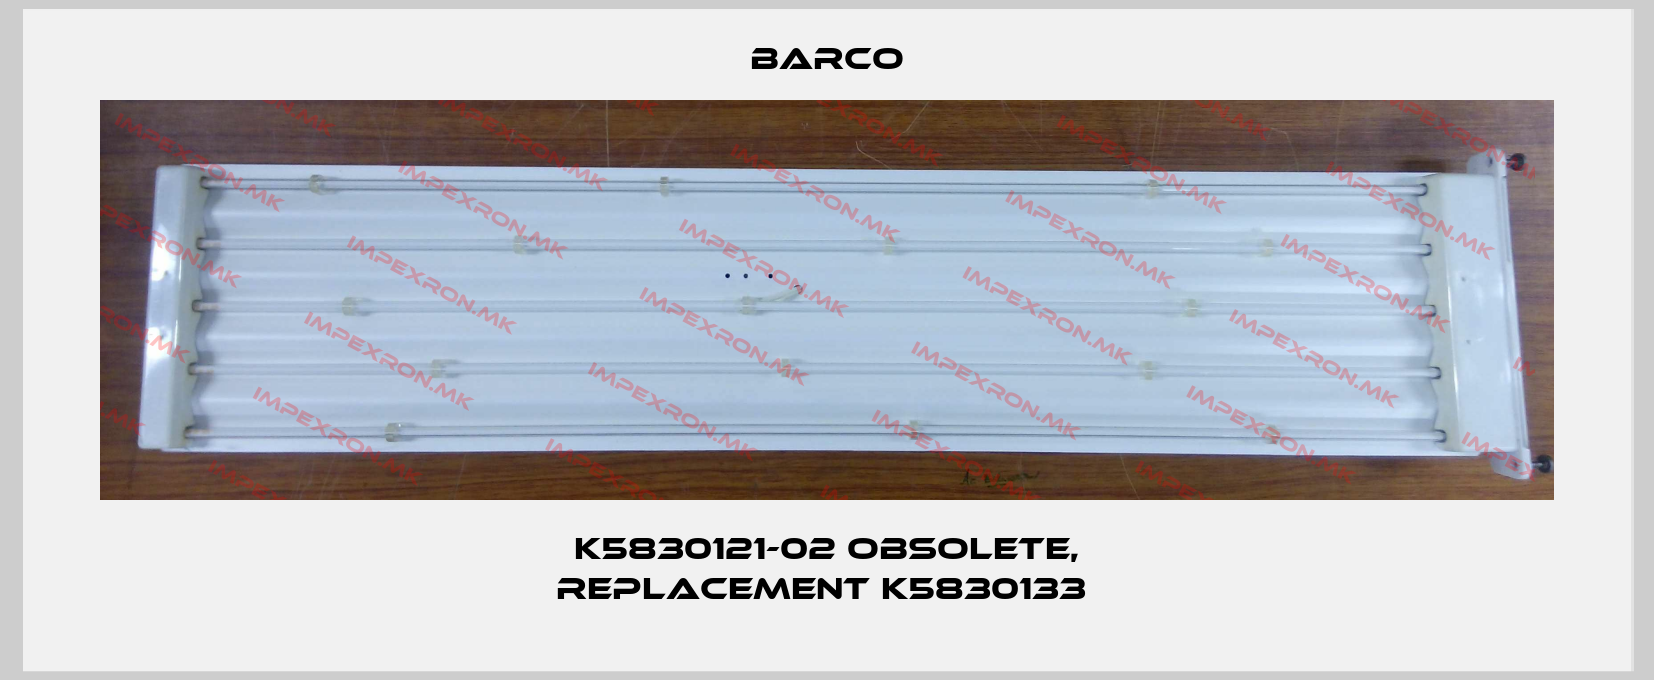 Barco-K5830121-02 obsolete, replacement K5830133 price